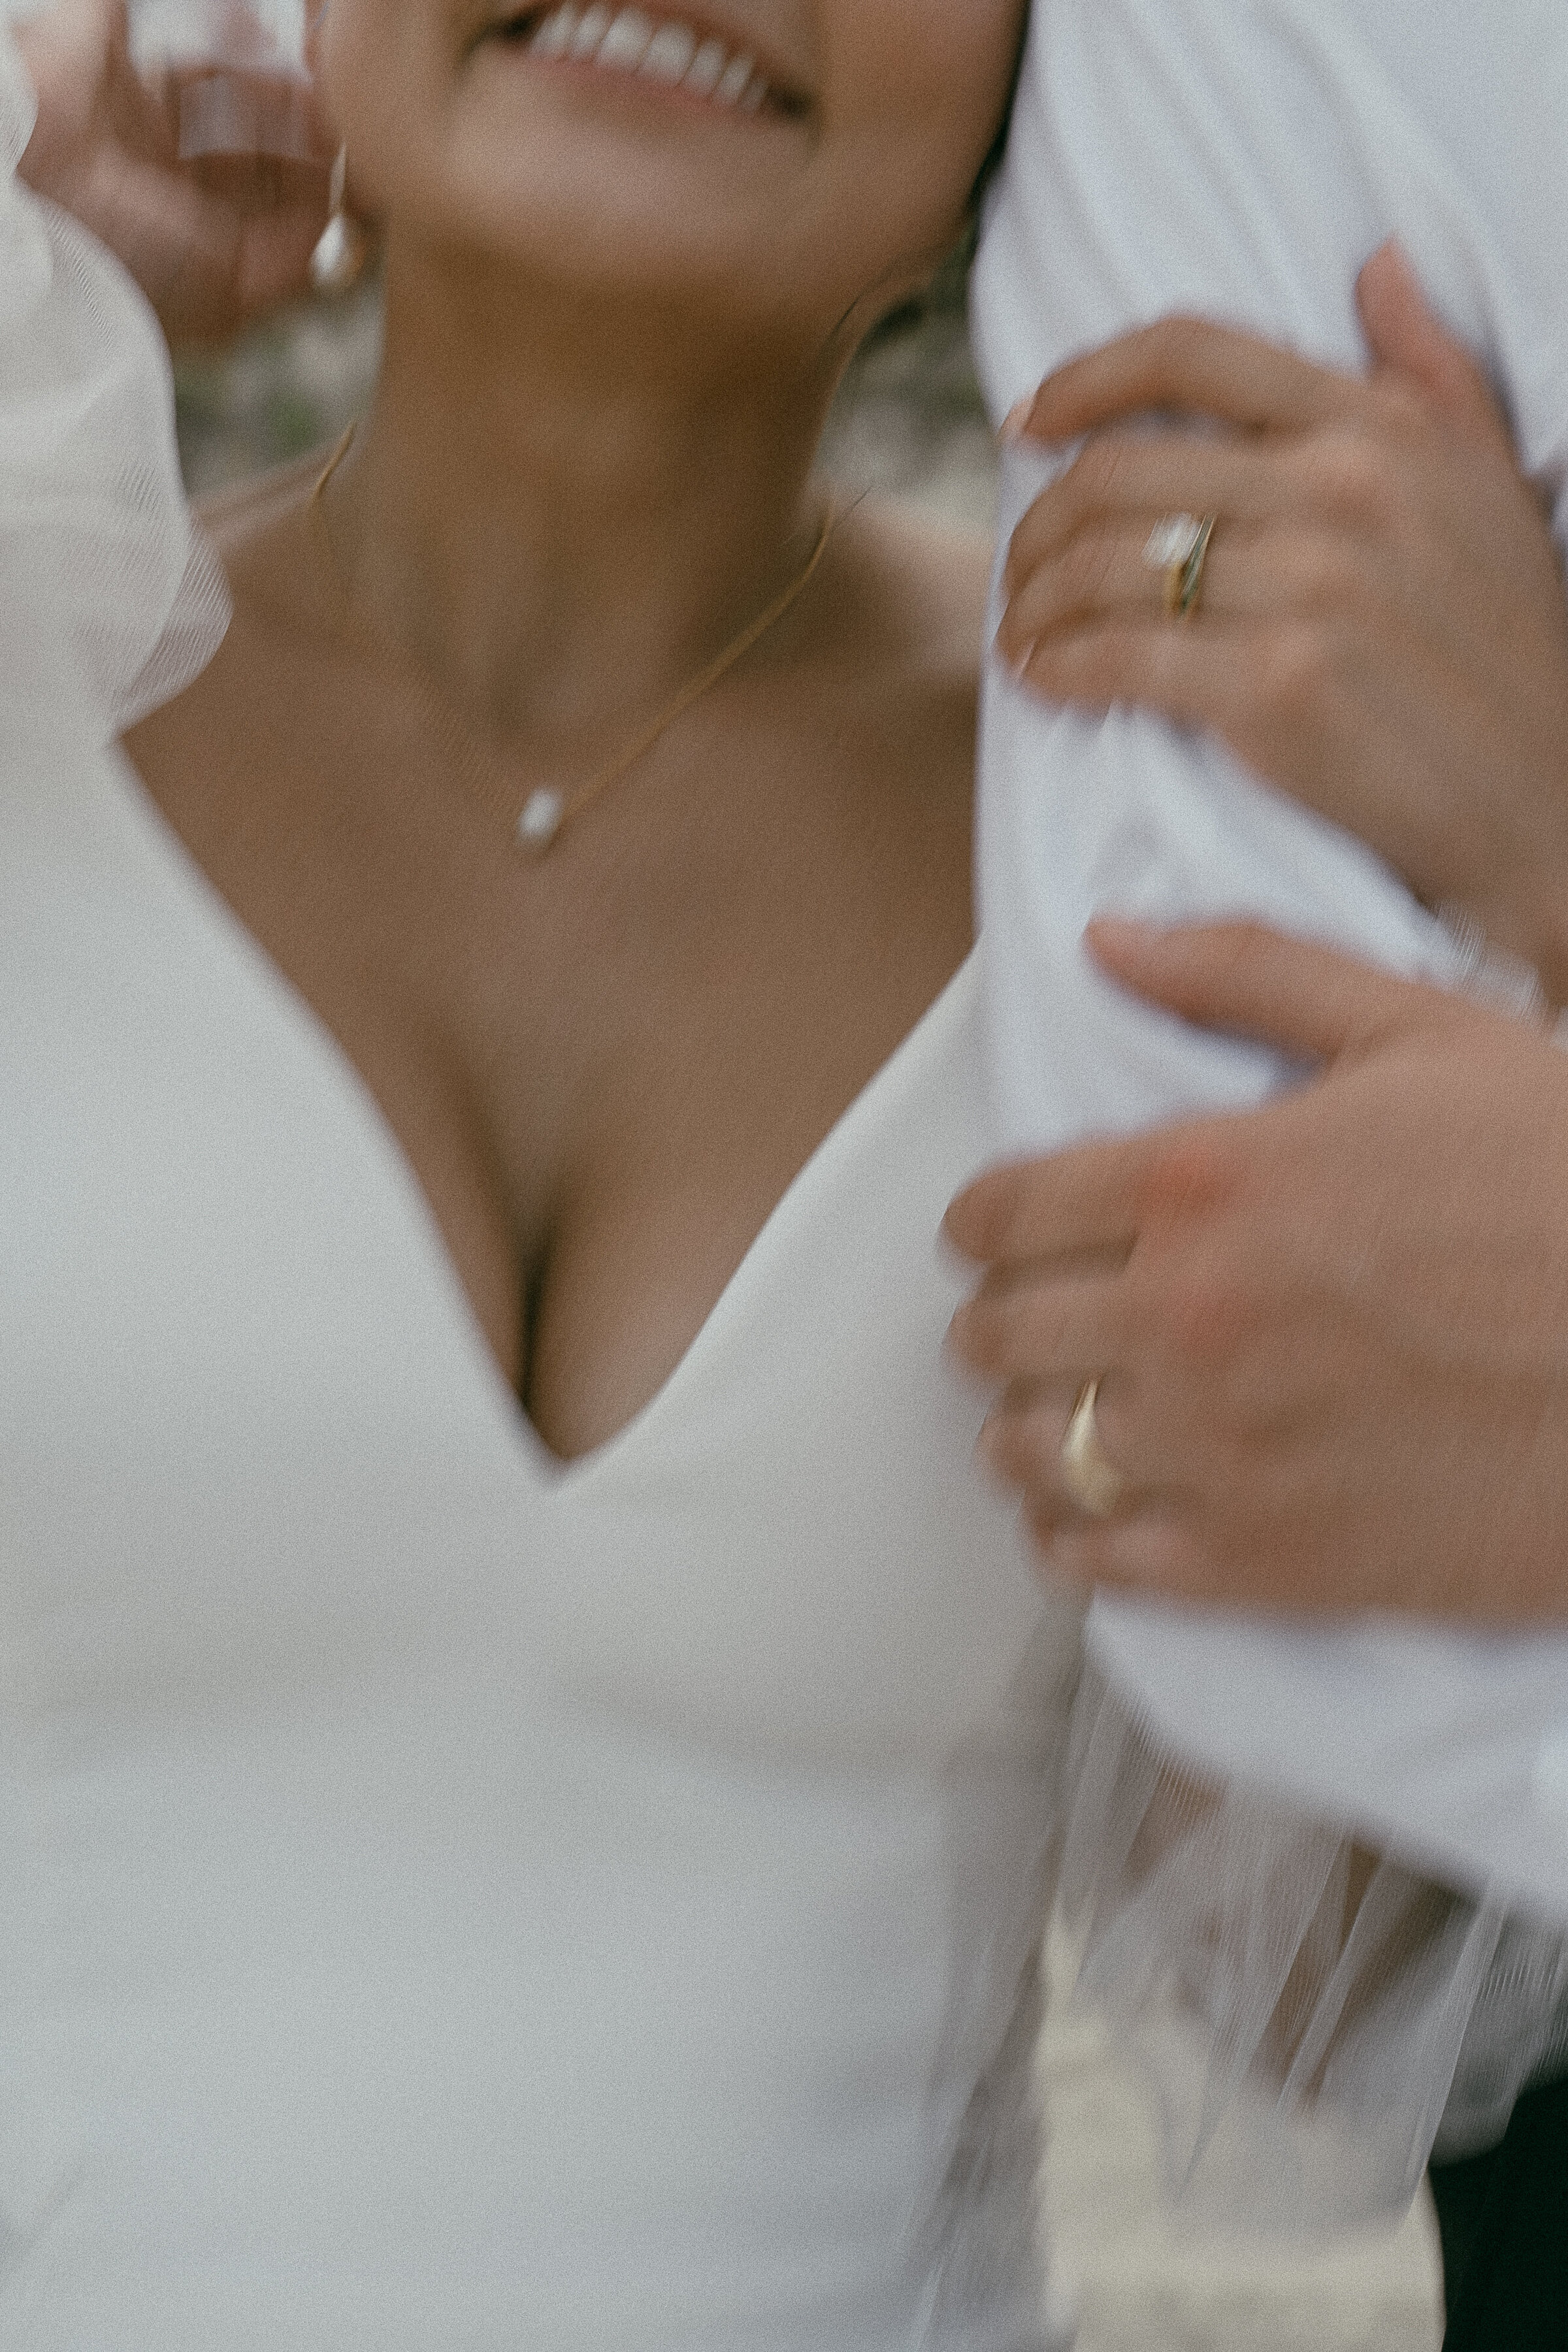 Blurred close-up of a bride smiling with the groom's hands around her.